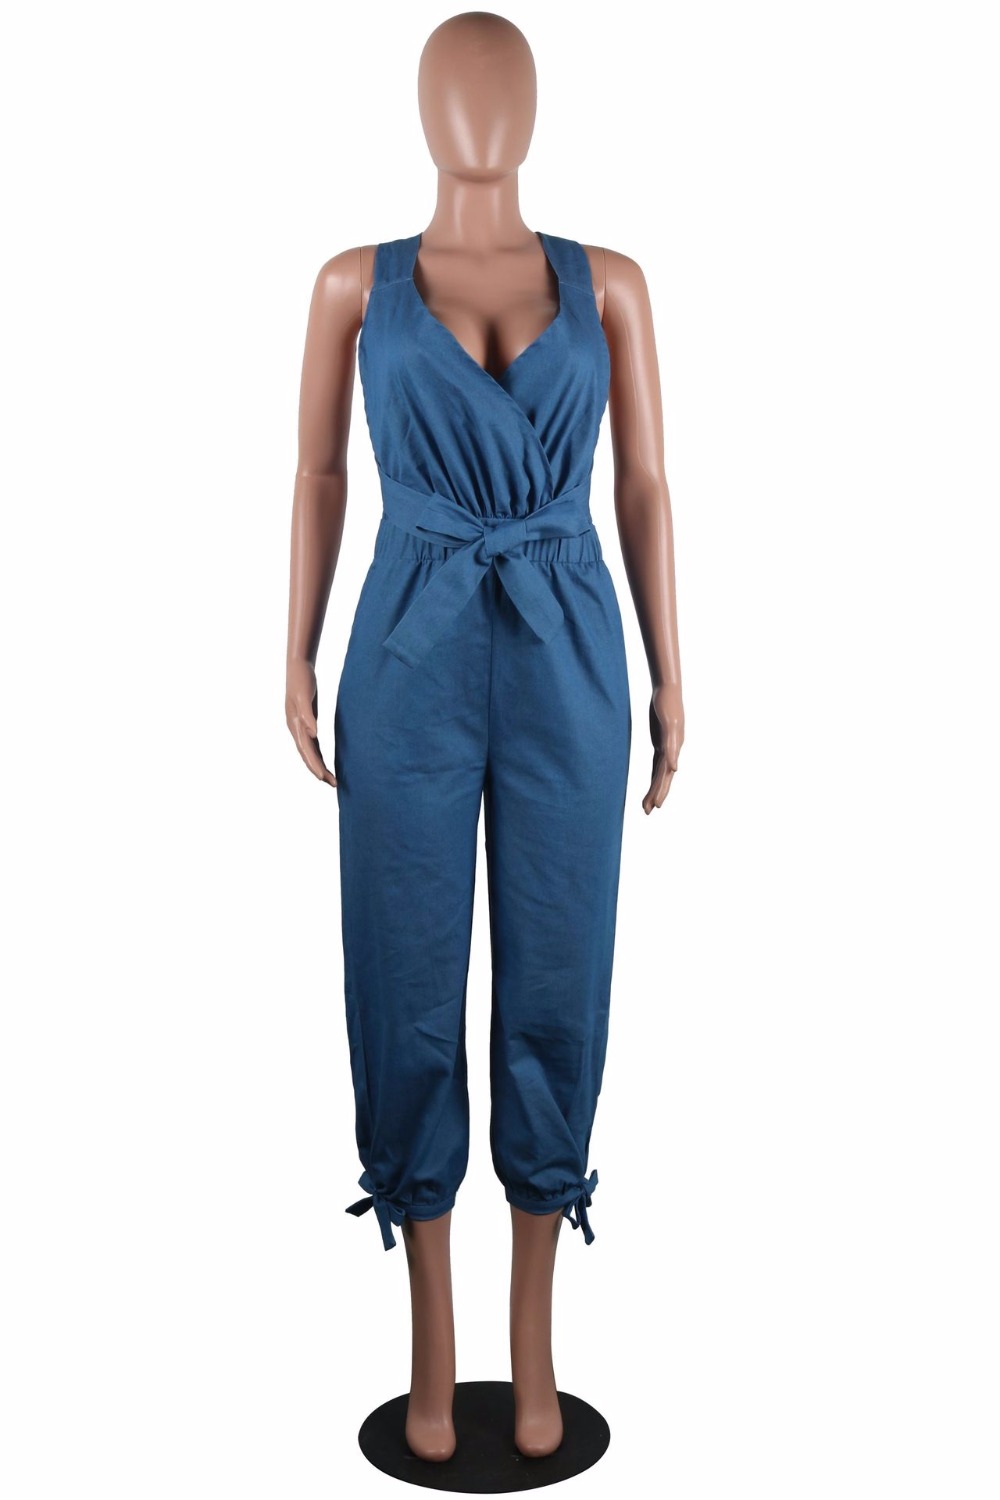 women Casual Denim Jeans Halter V Neck Jumpsuits Overalls Summer Sexy Backless Sleeveless Playsuits Plus Size High Street Romper